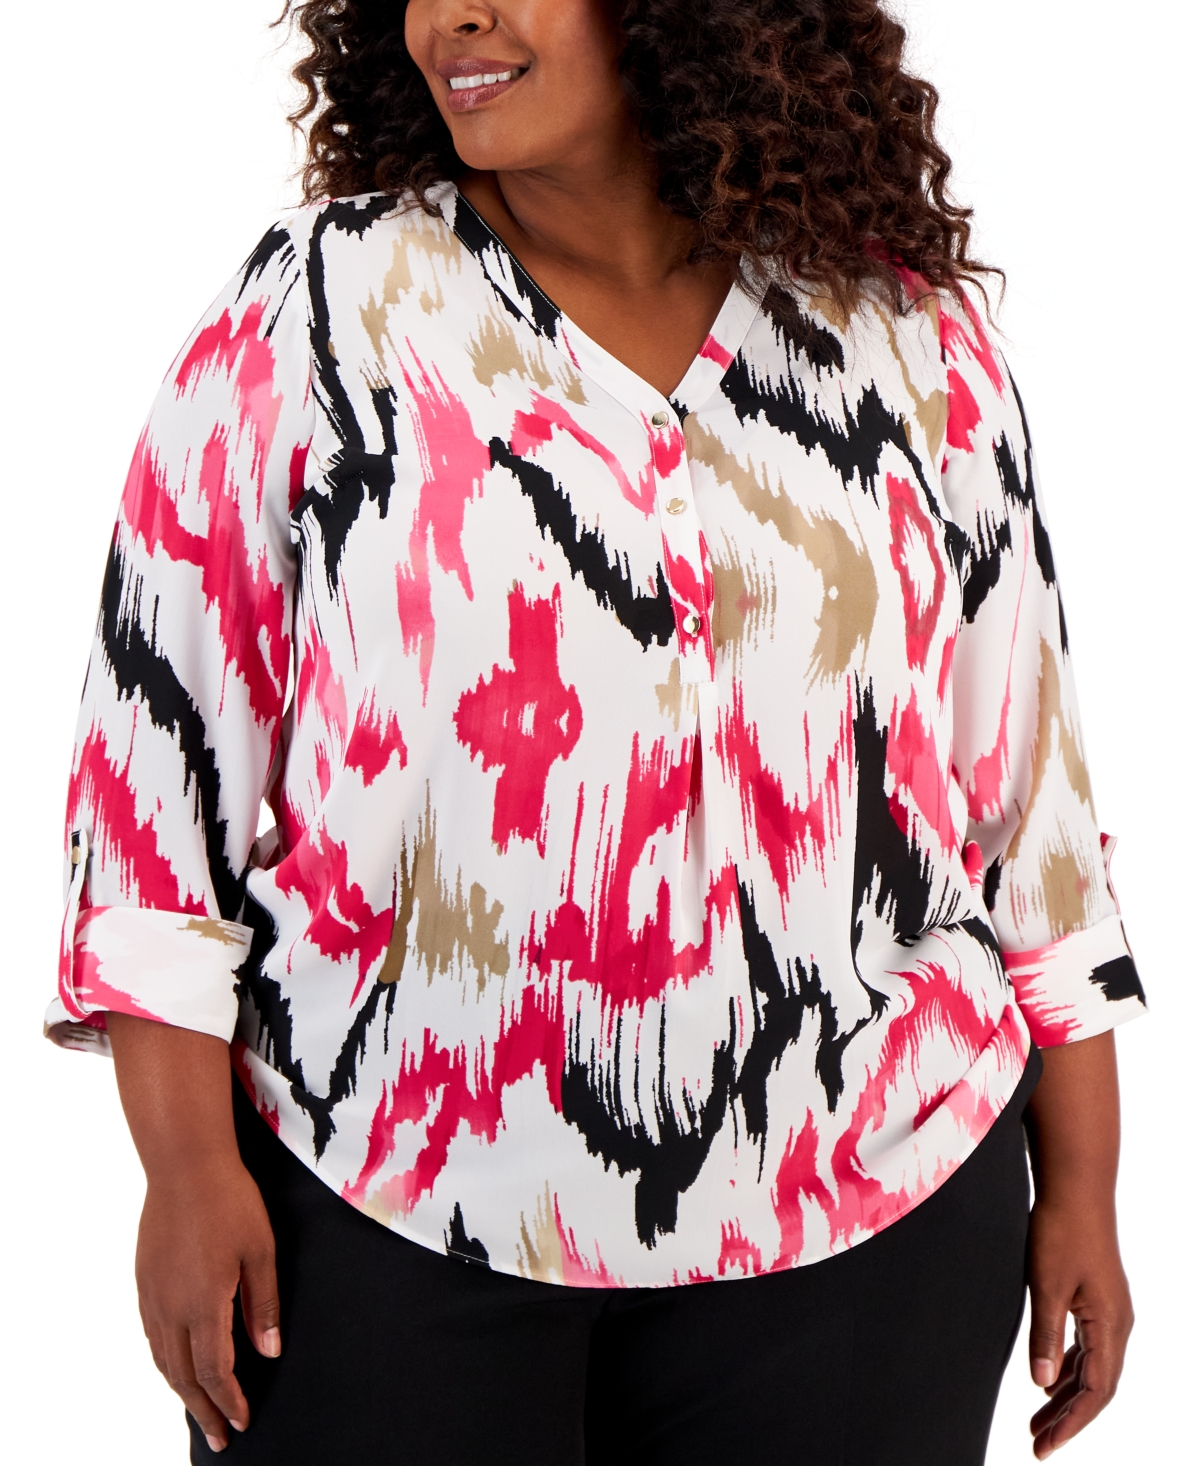 JM COLLECTION PLUS SIZE PRINTED UTILITY TOP, CREATED FOR MACY'S